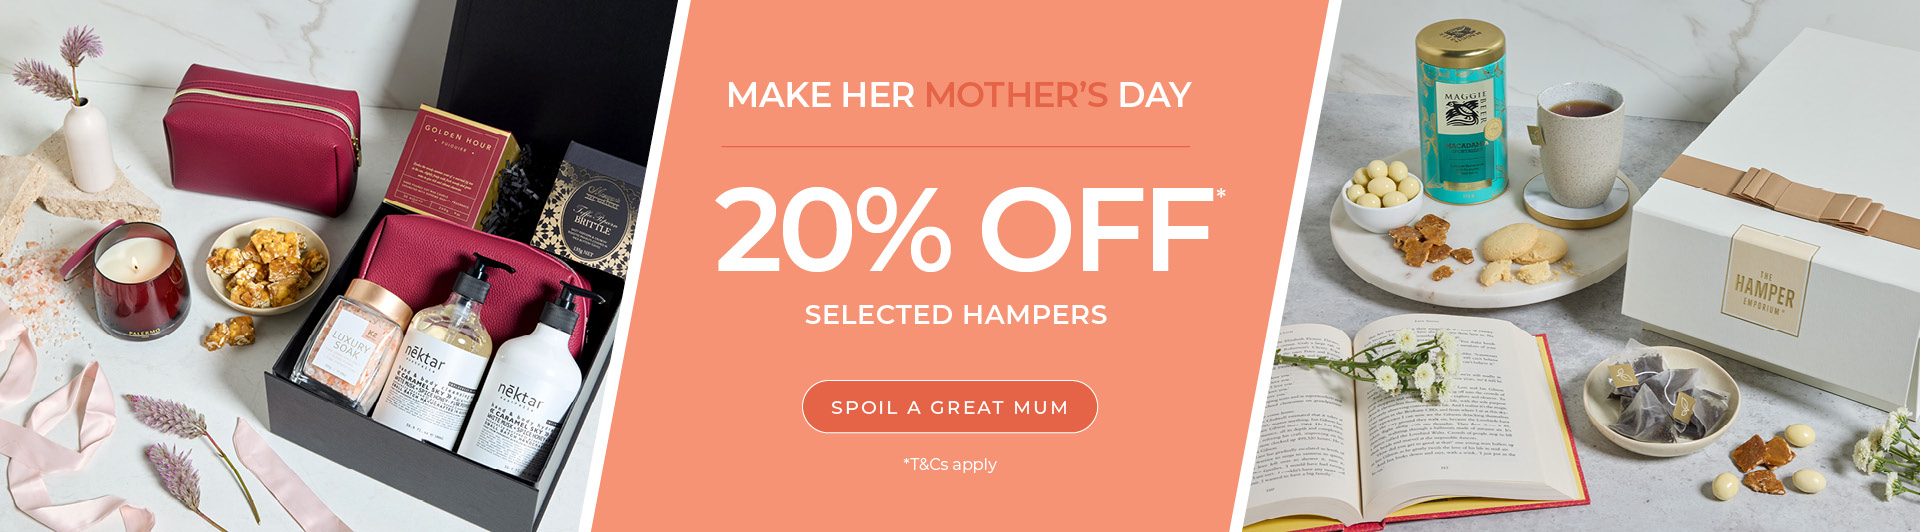 Mother's Day - 20% Off Selected Hampers